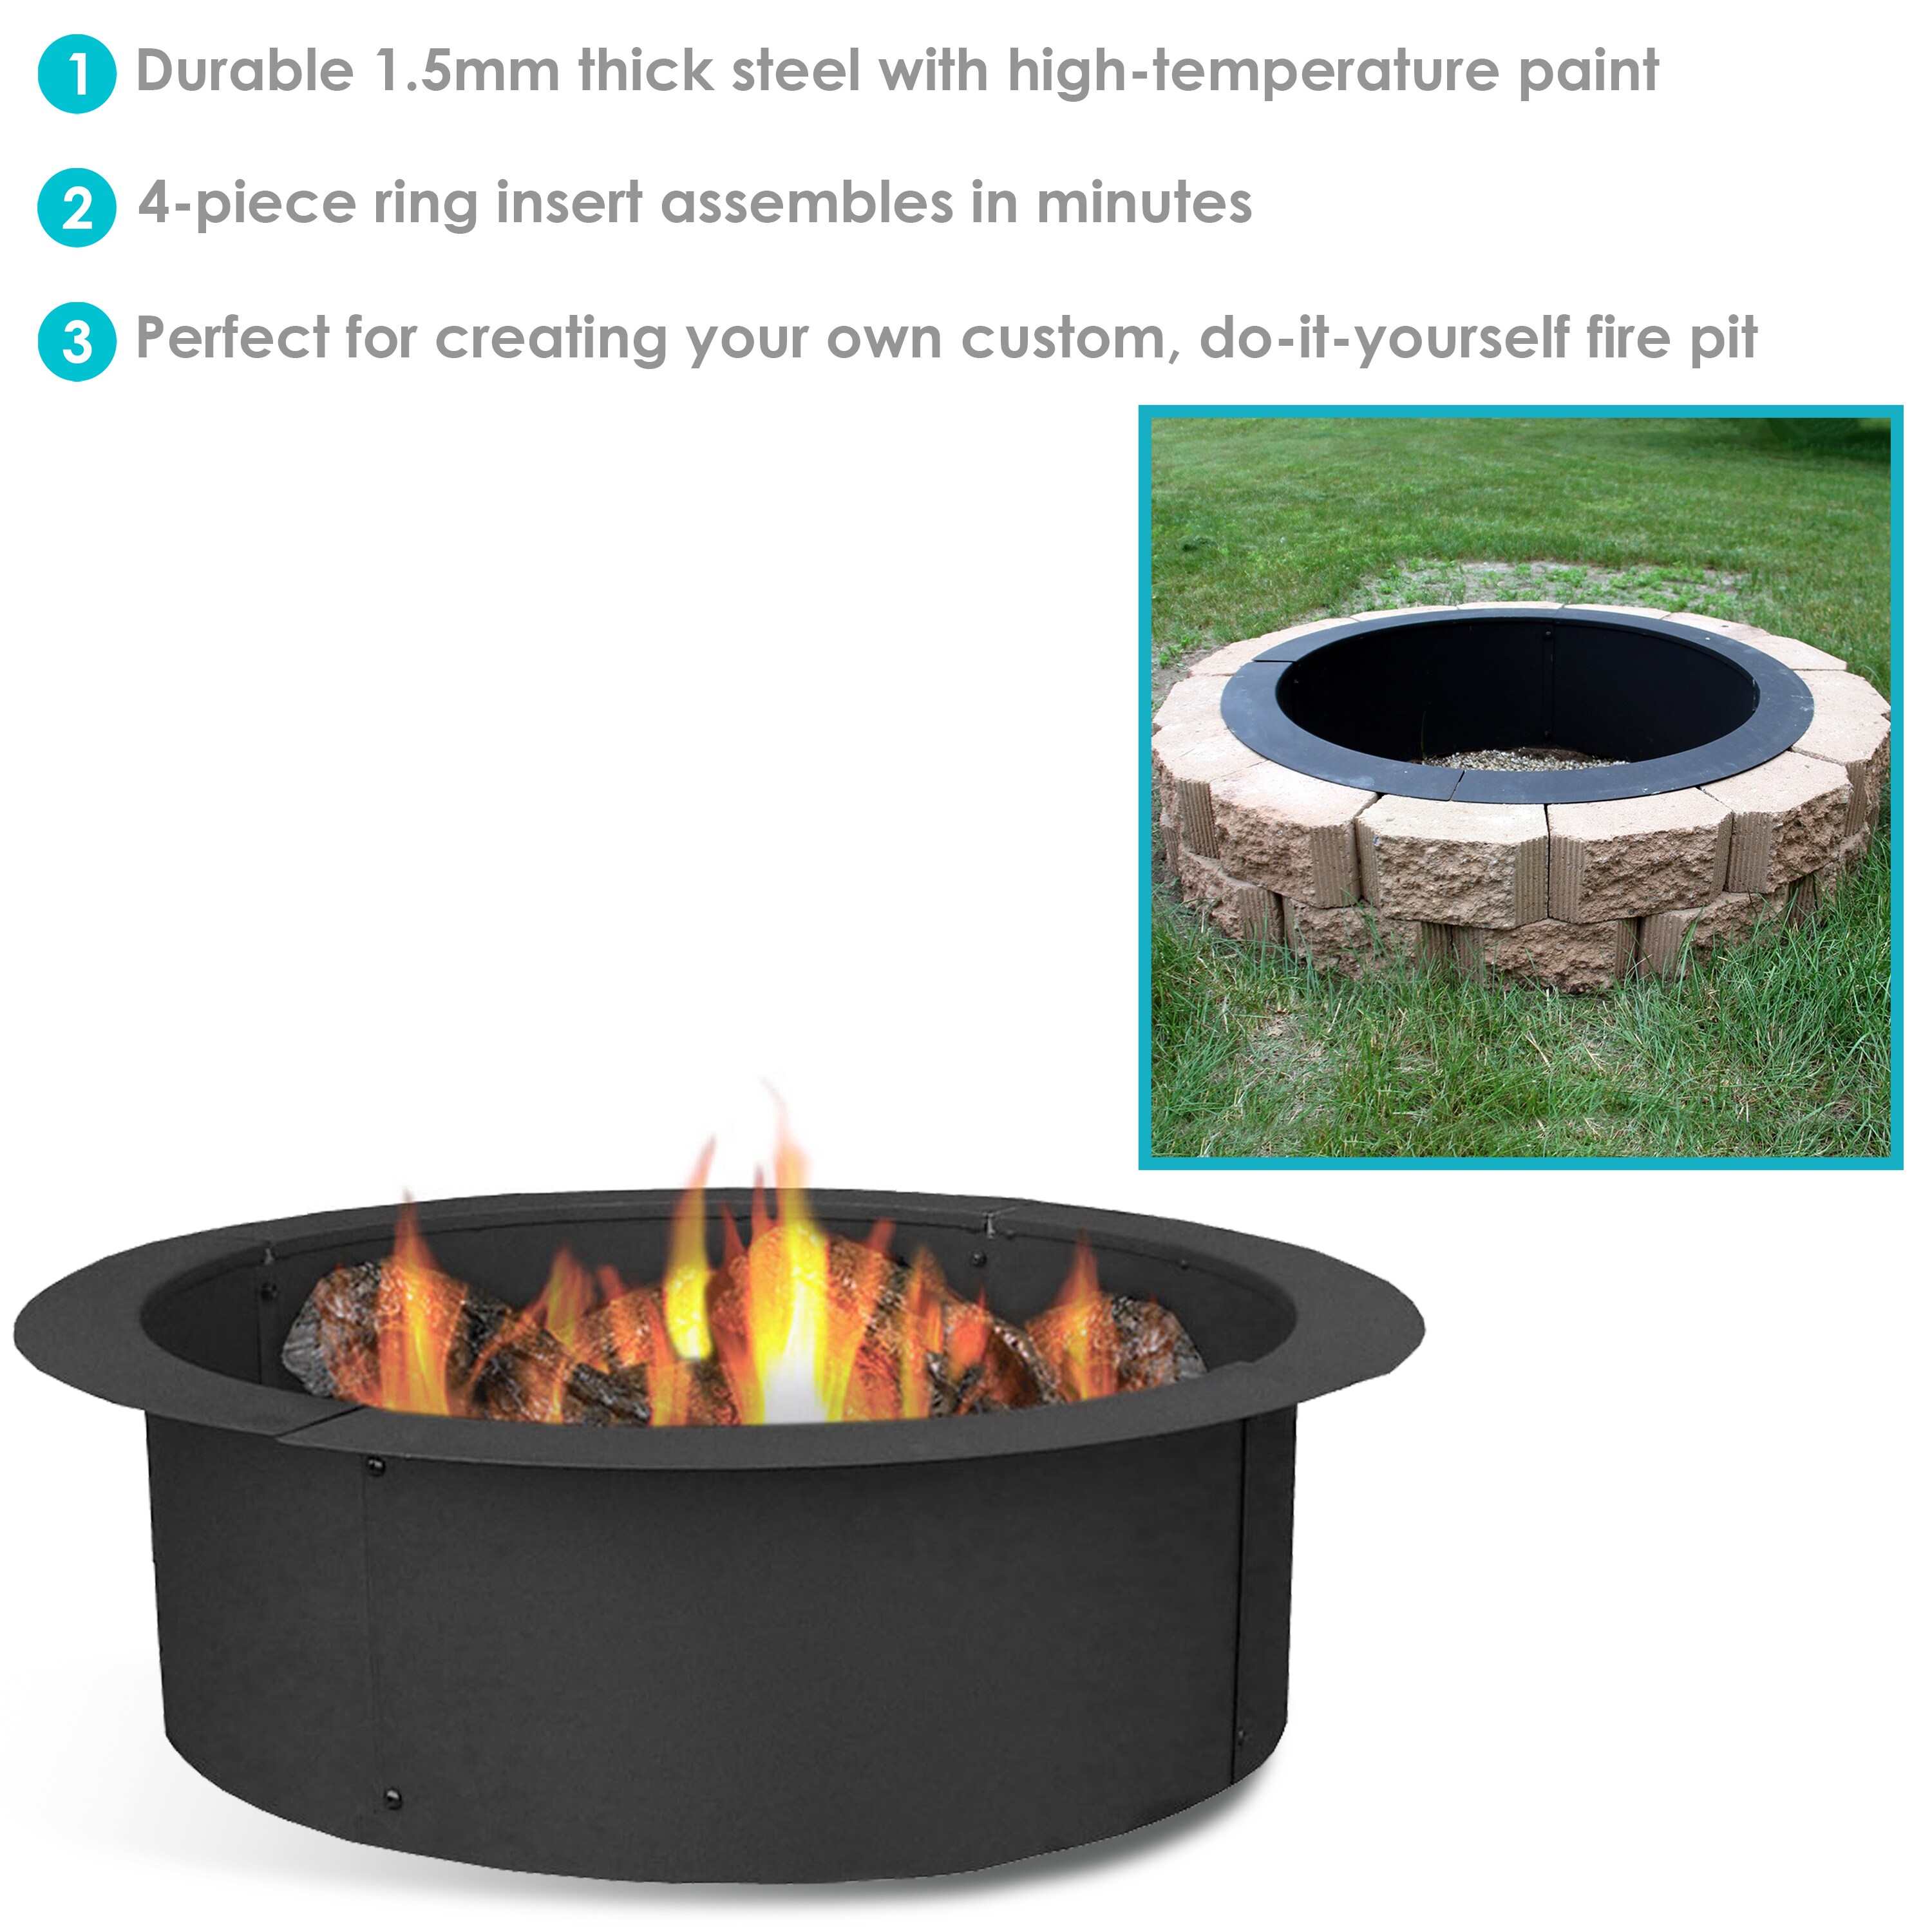 42 Inch Outside x 36 Inch Inside for Patio & Backyard Use Outdoor Portable Wood Burning Fireplace DIY Above or In-Ground Liner Heavy Duty 2mm Think Steel Rim Sunnydaze Fire Pit Ring 